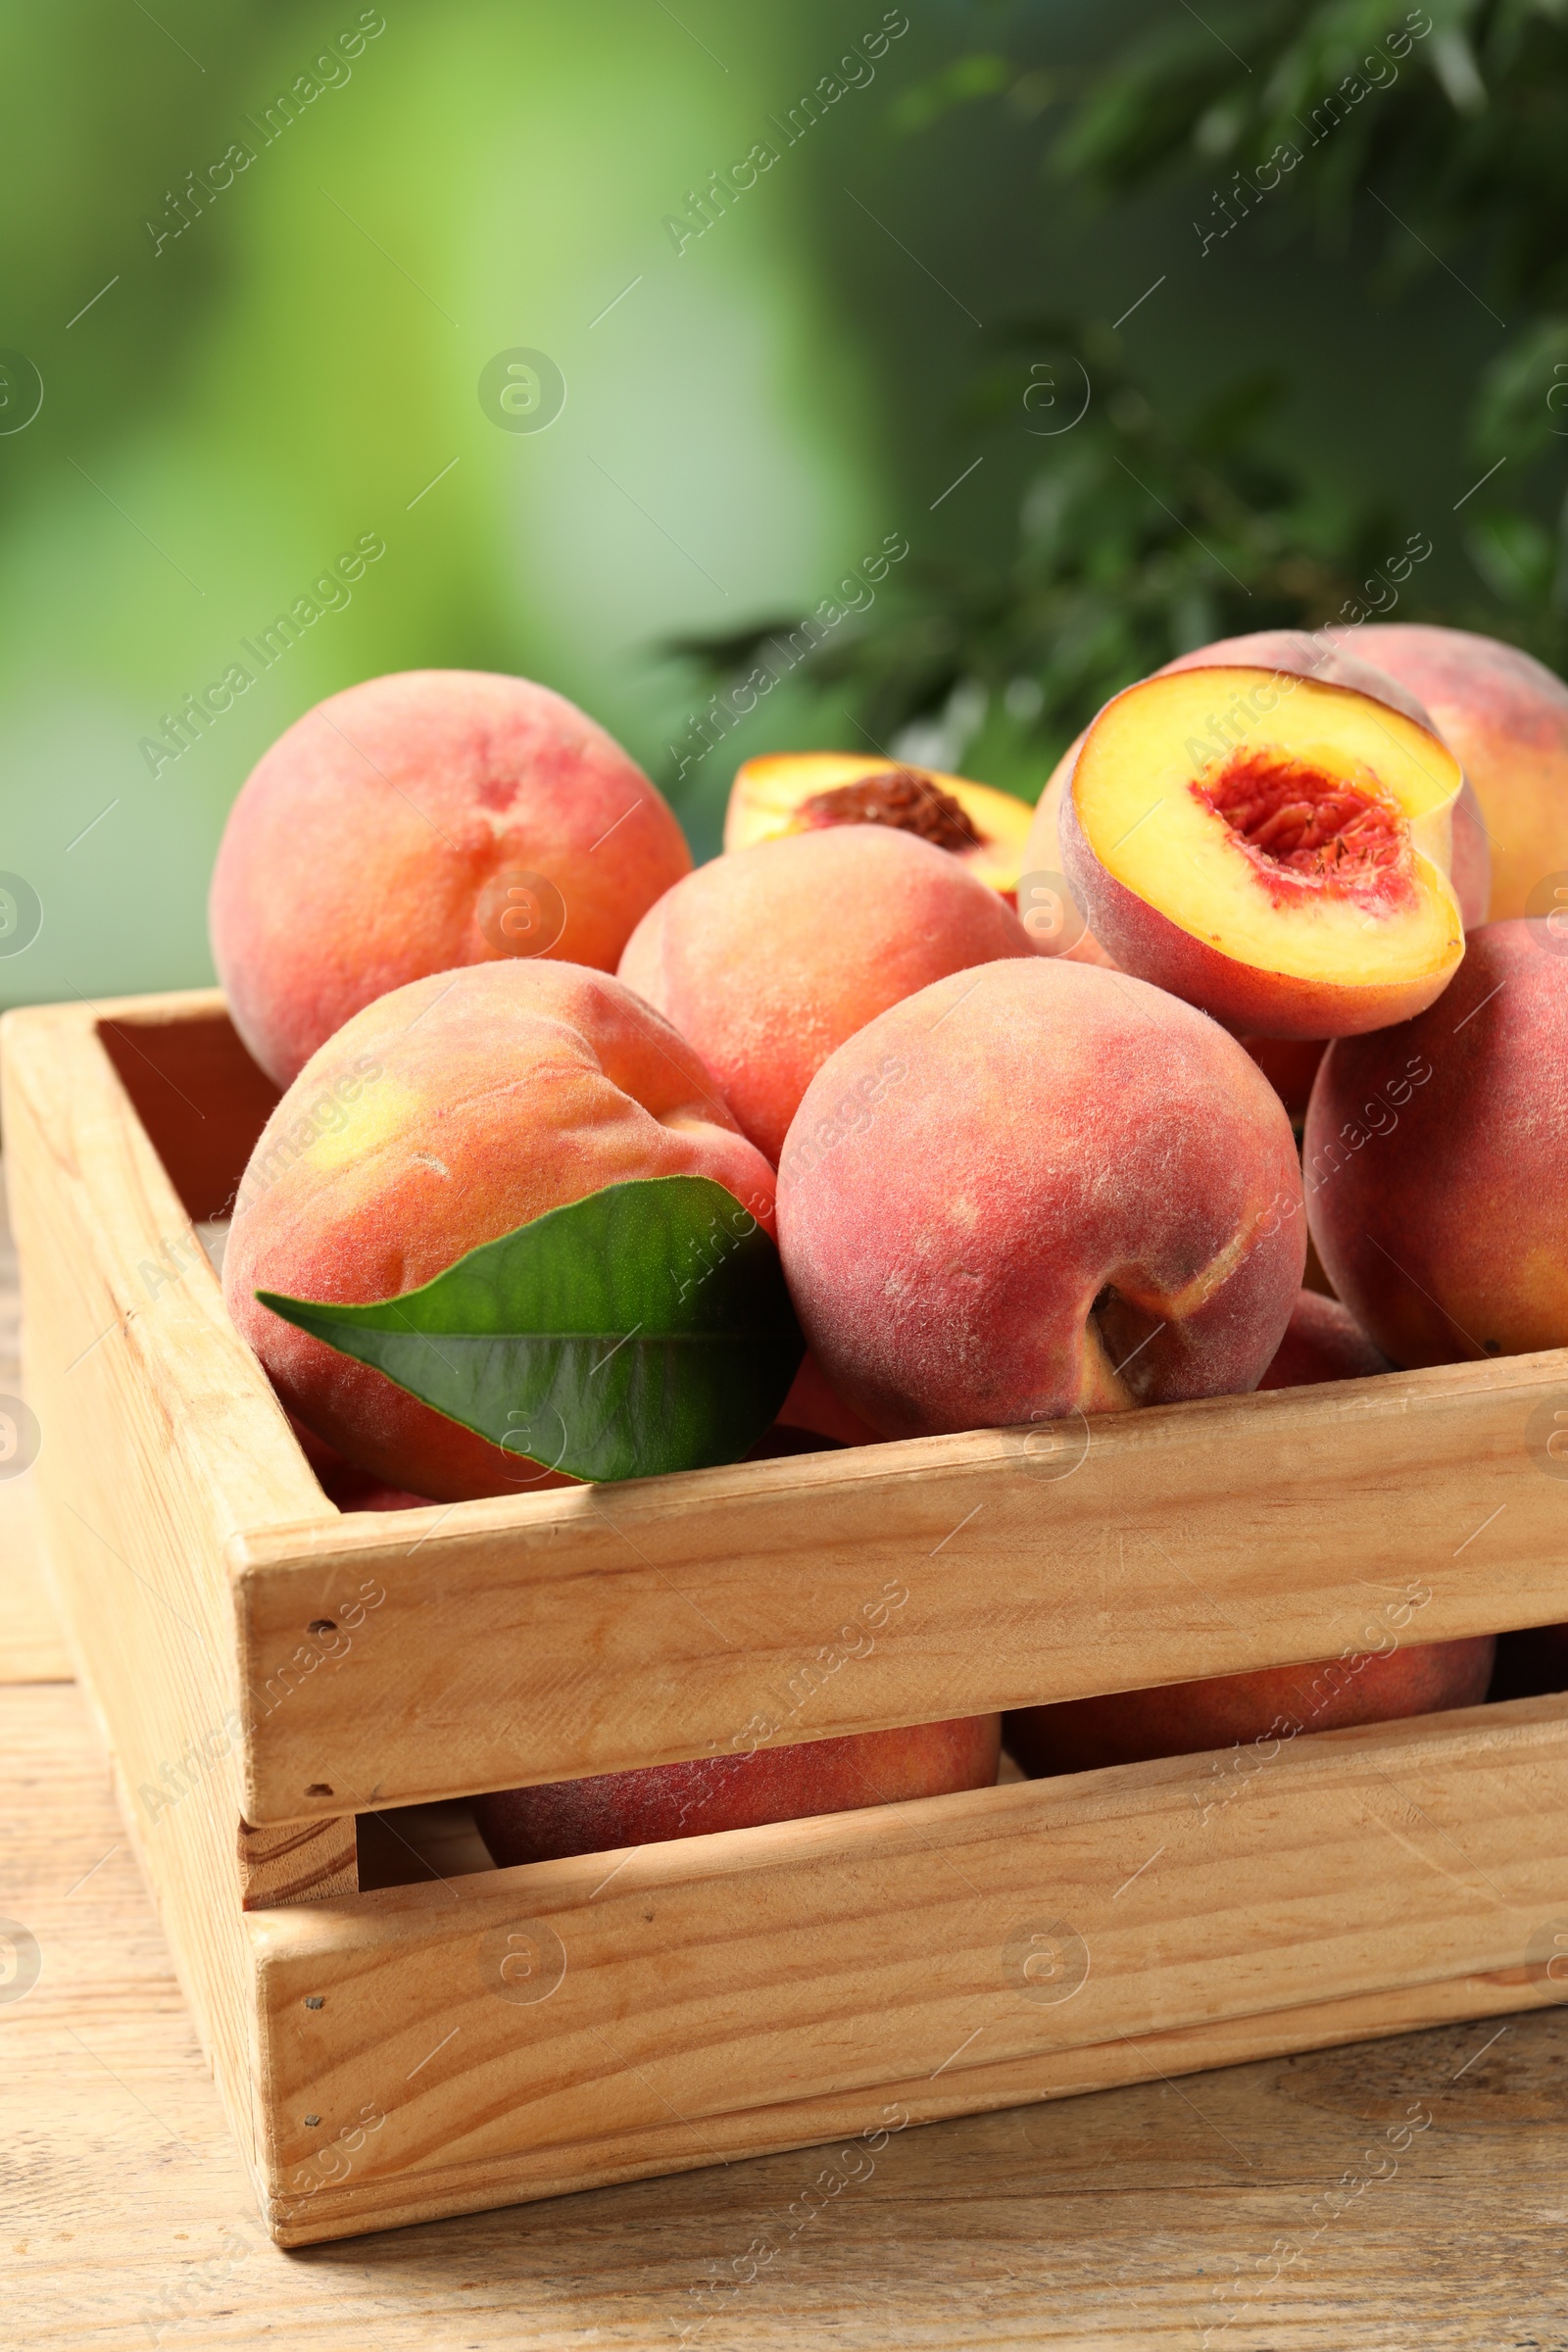 Photo of Cut and whole fresh ripe peaches in crate on wooden table against blurred background, closeup